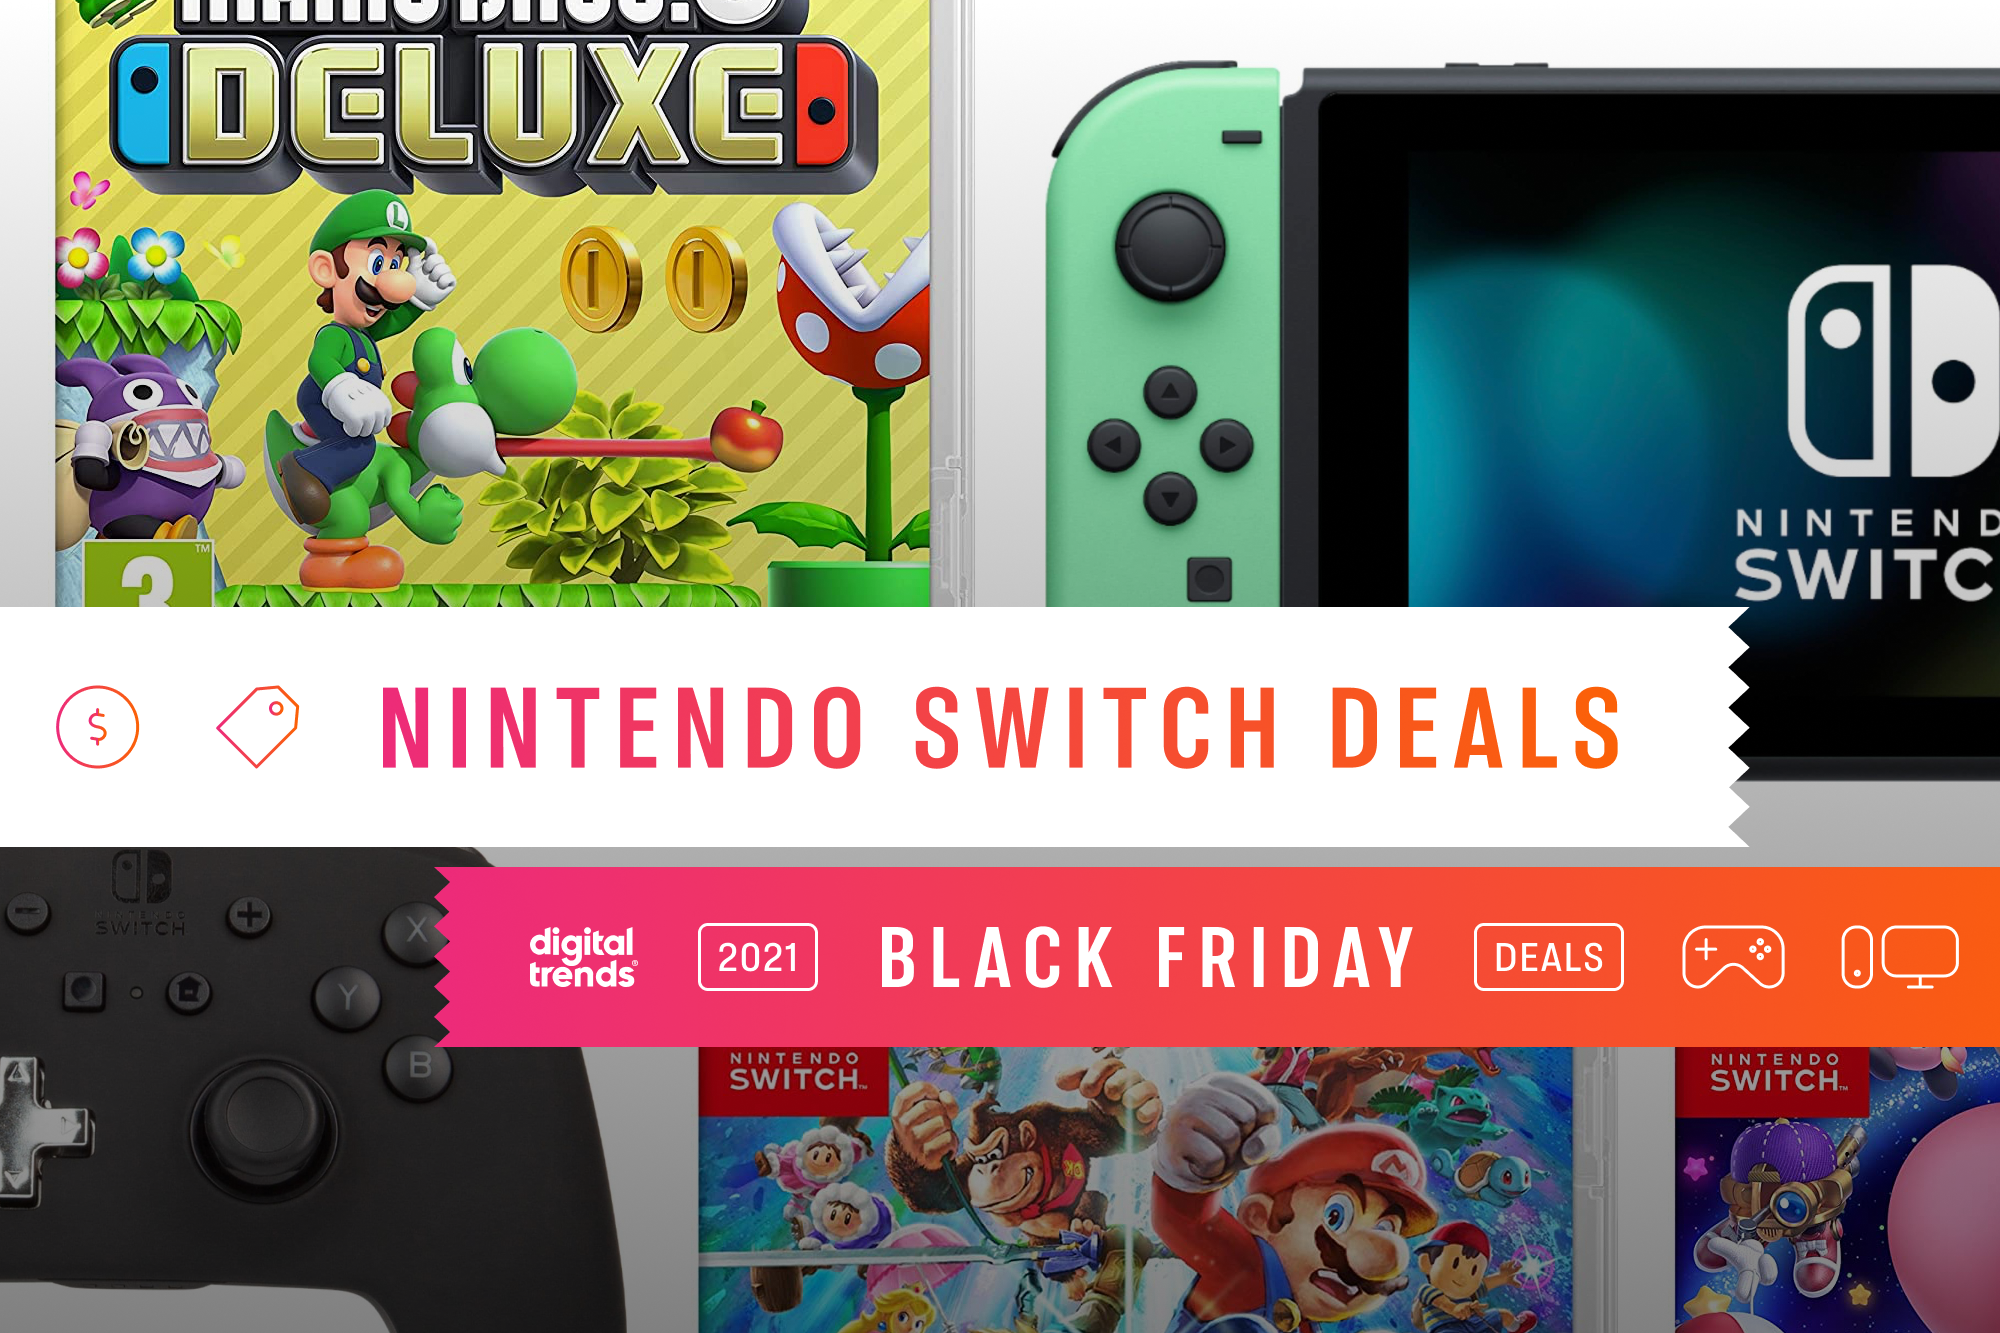 Nintendo Switch Black Friday deals live blog: the best offers on consoles,  games and accessories